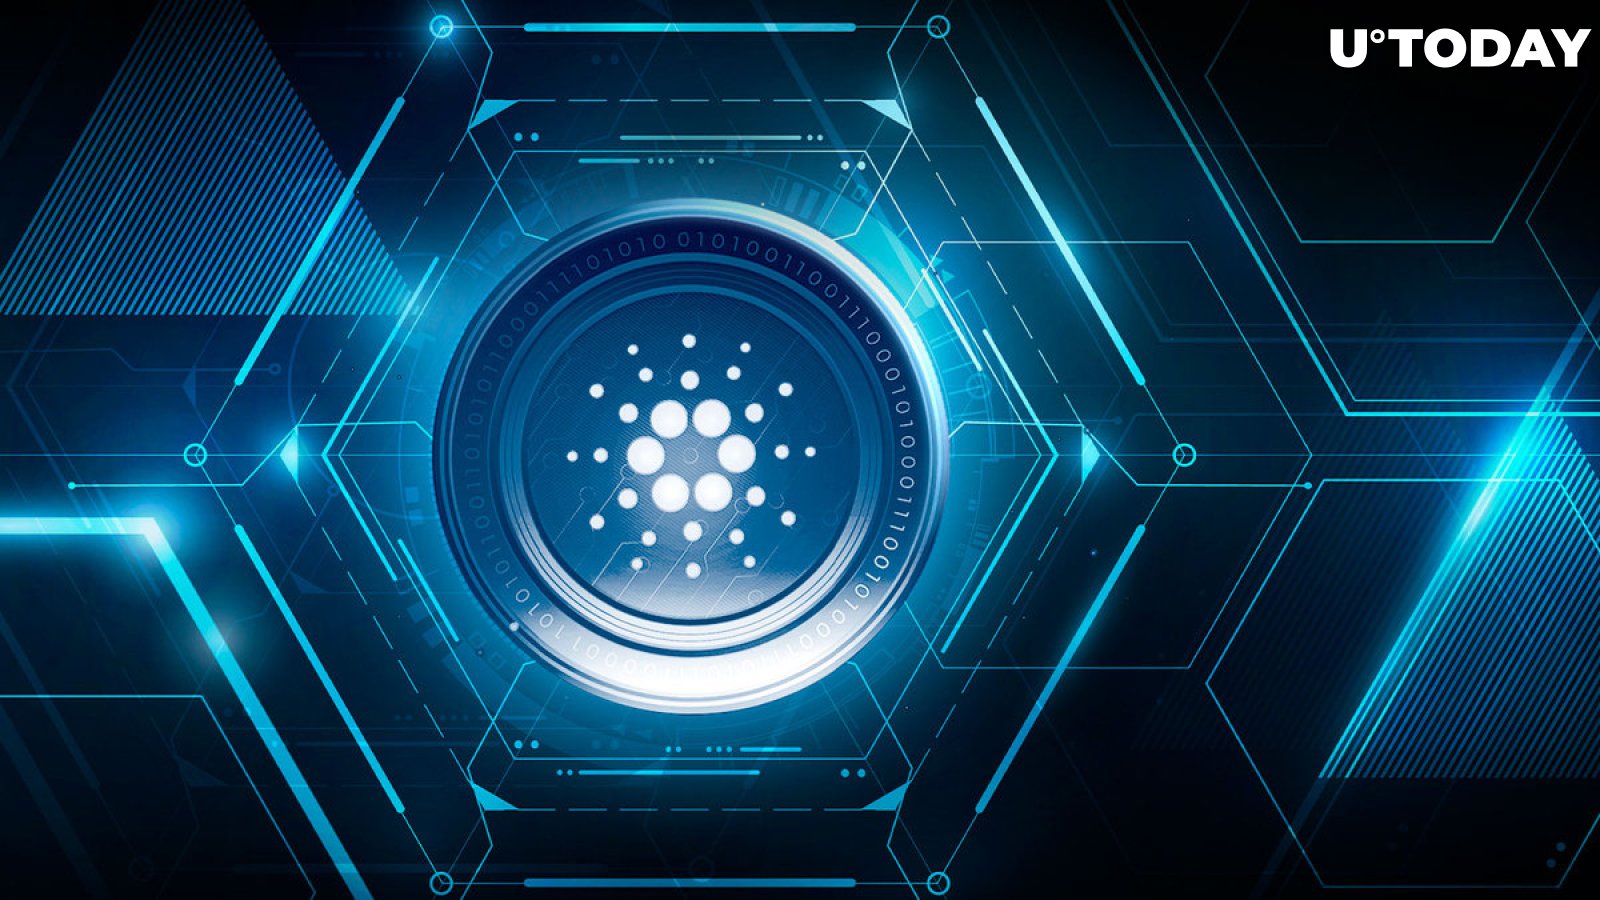 Cardano (ADA) Ready for 10x Dev Experience Upgrade: Details